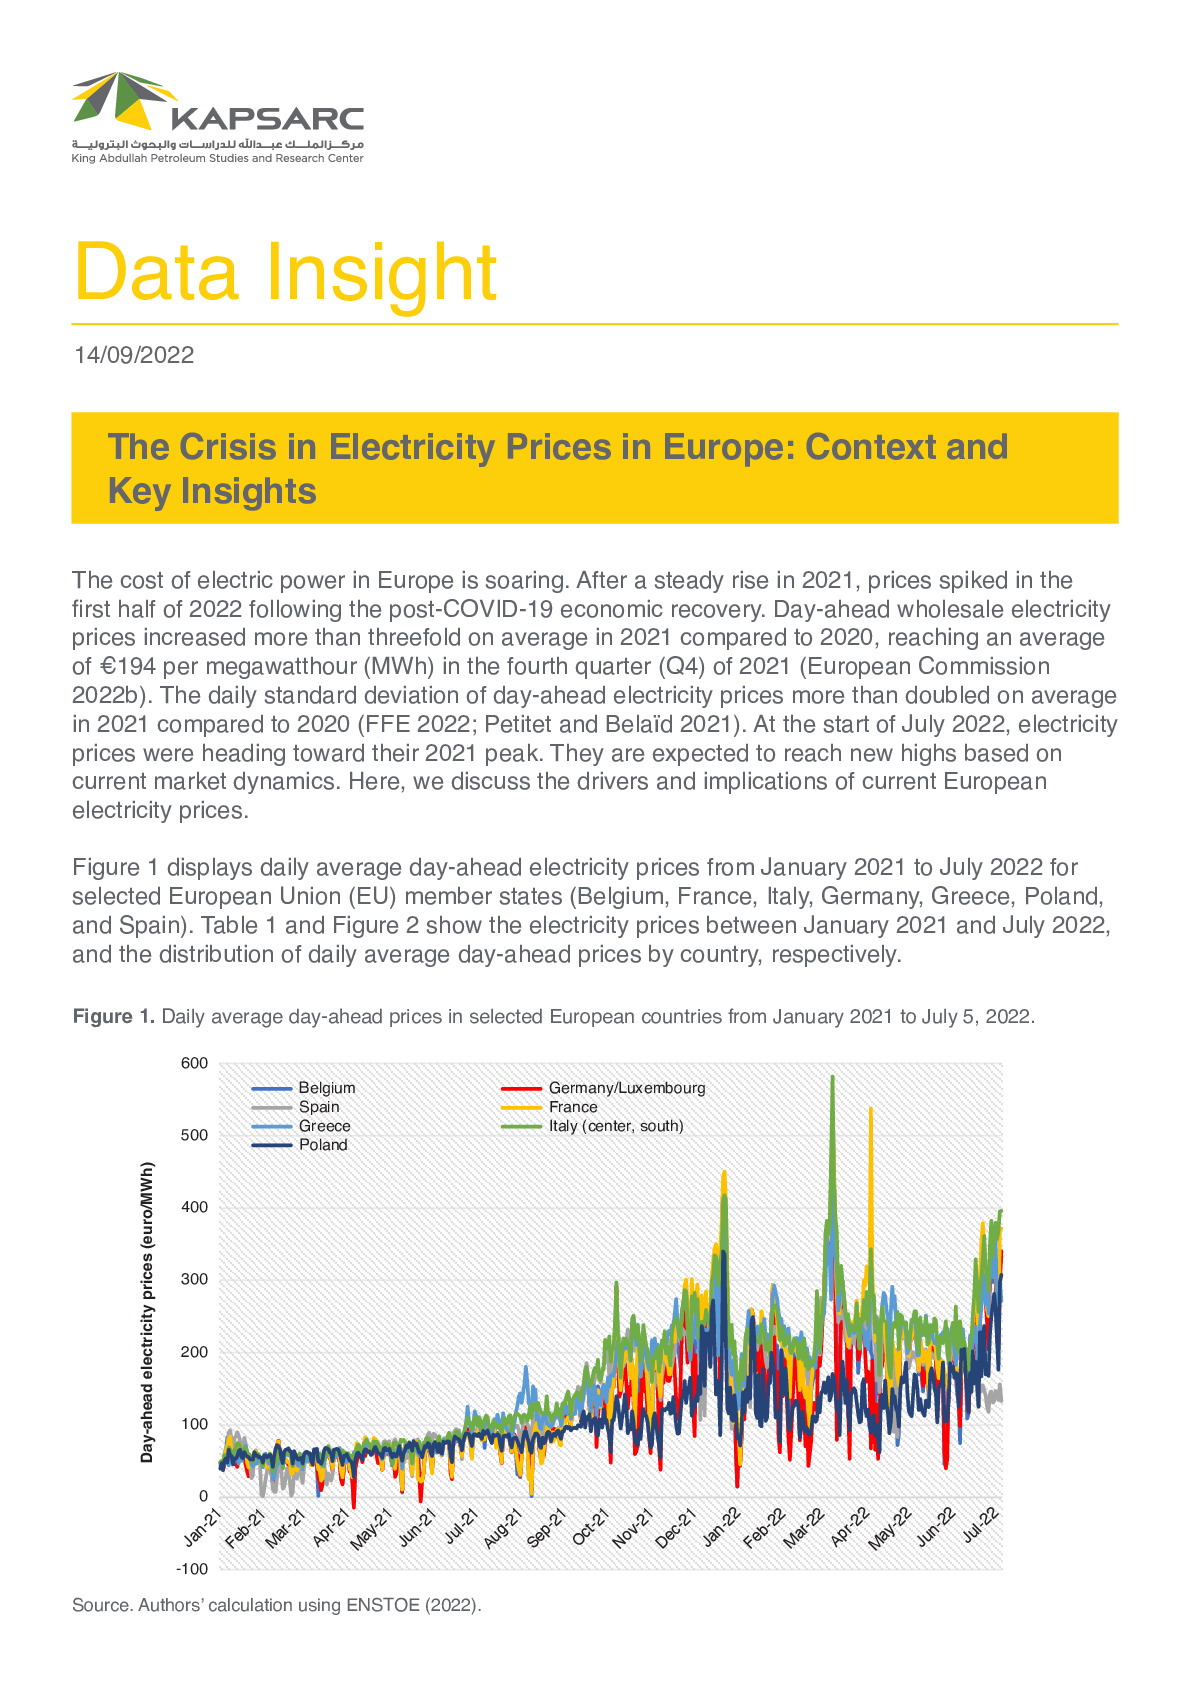 The Crisis in Electricity Prices in Europe: Context and Key Insights